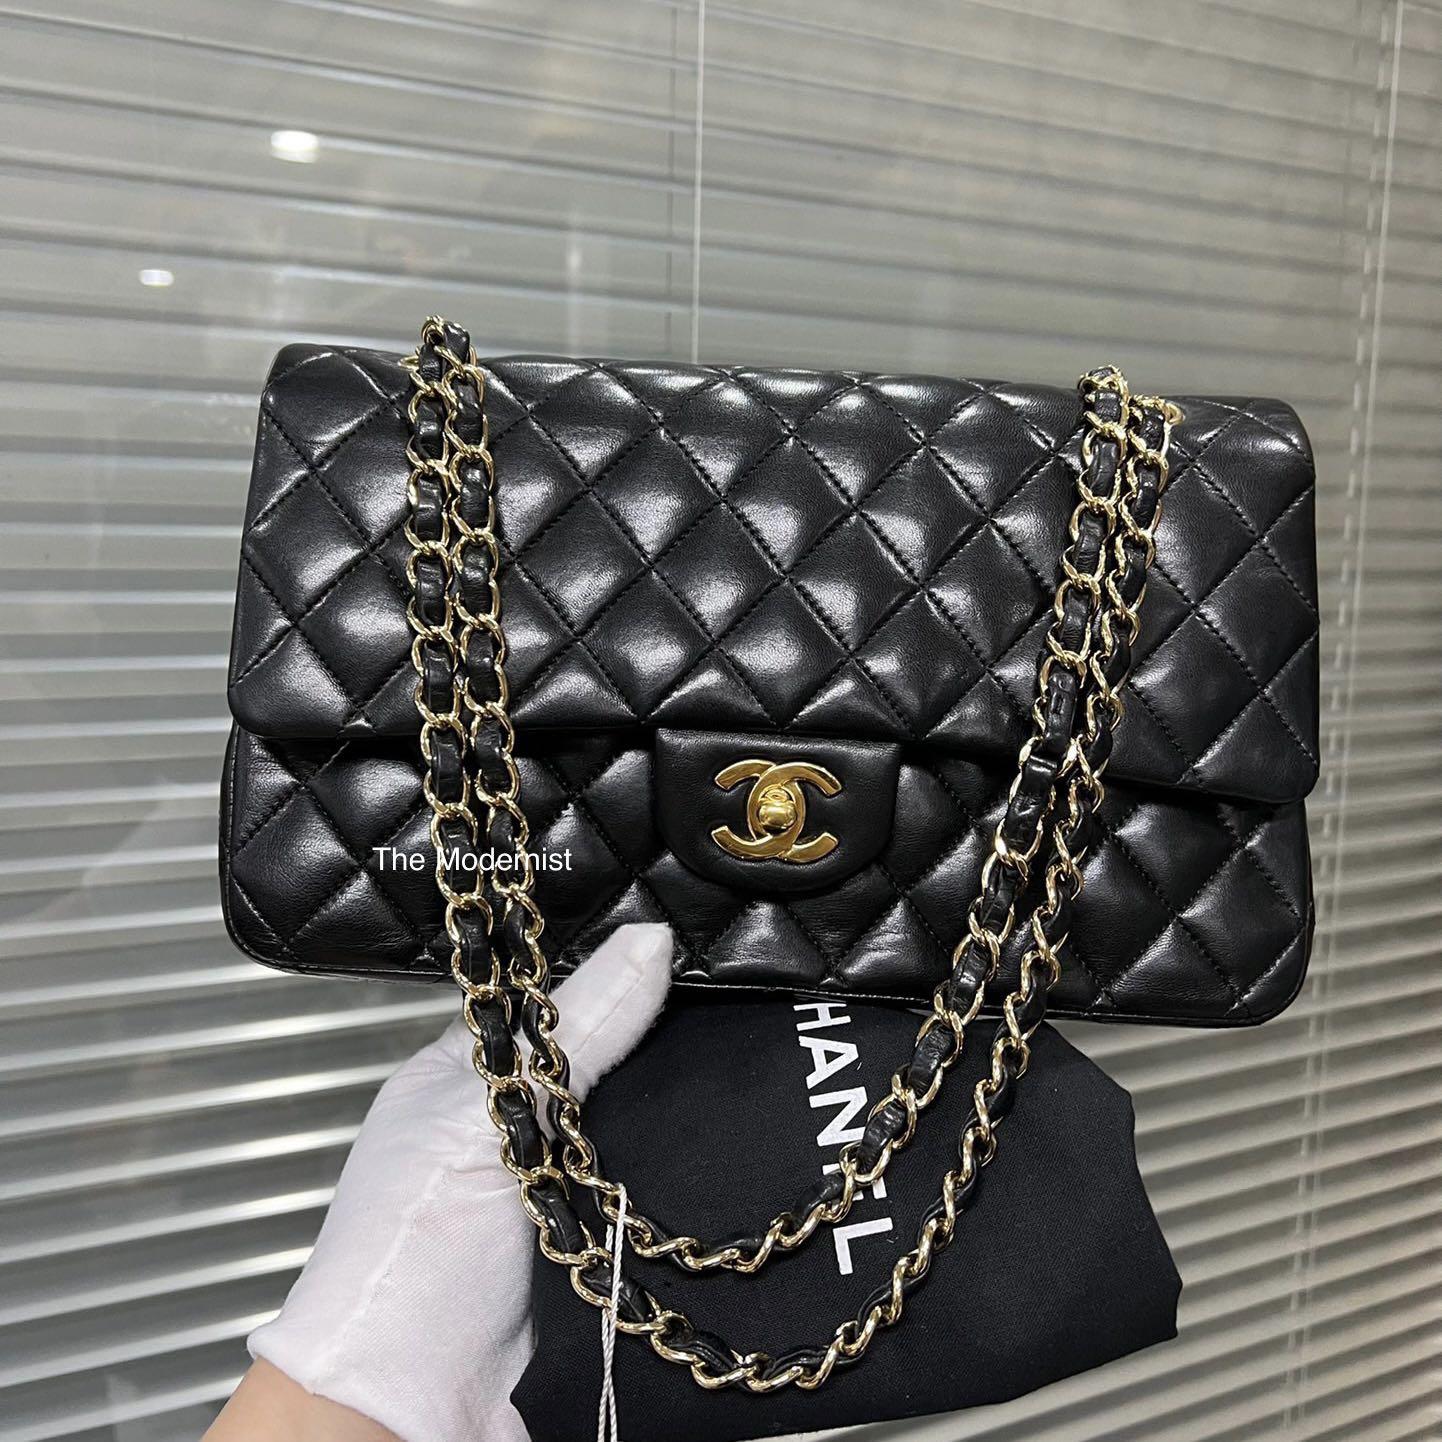 Chanel double flap medium handbag with tags. Guaranteed Authentic